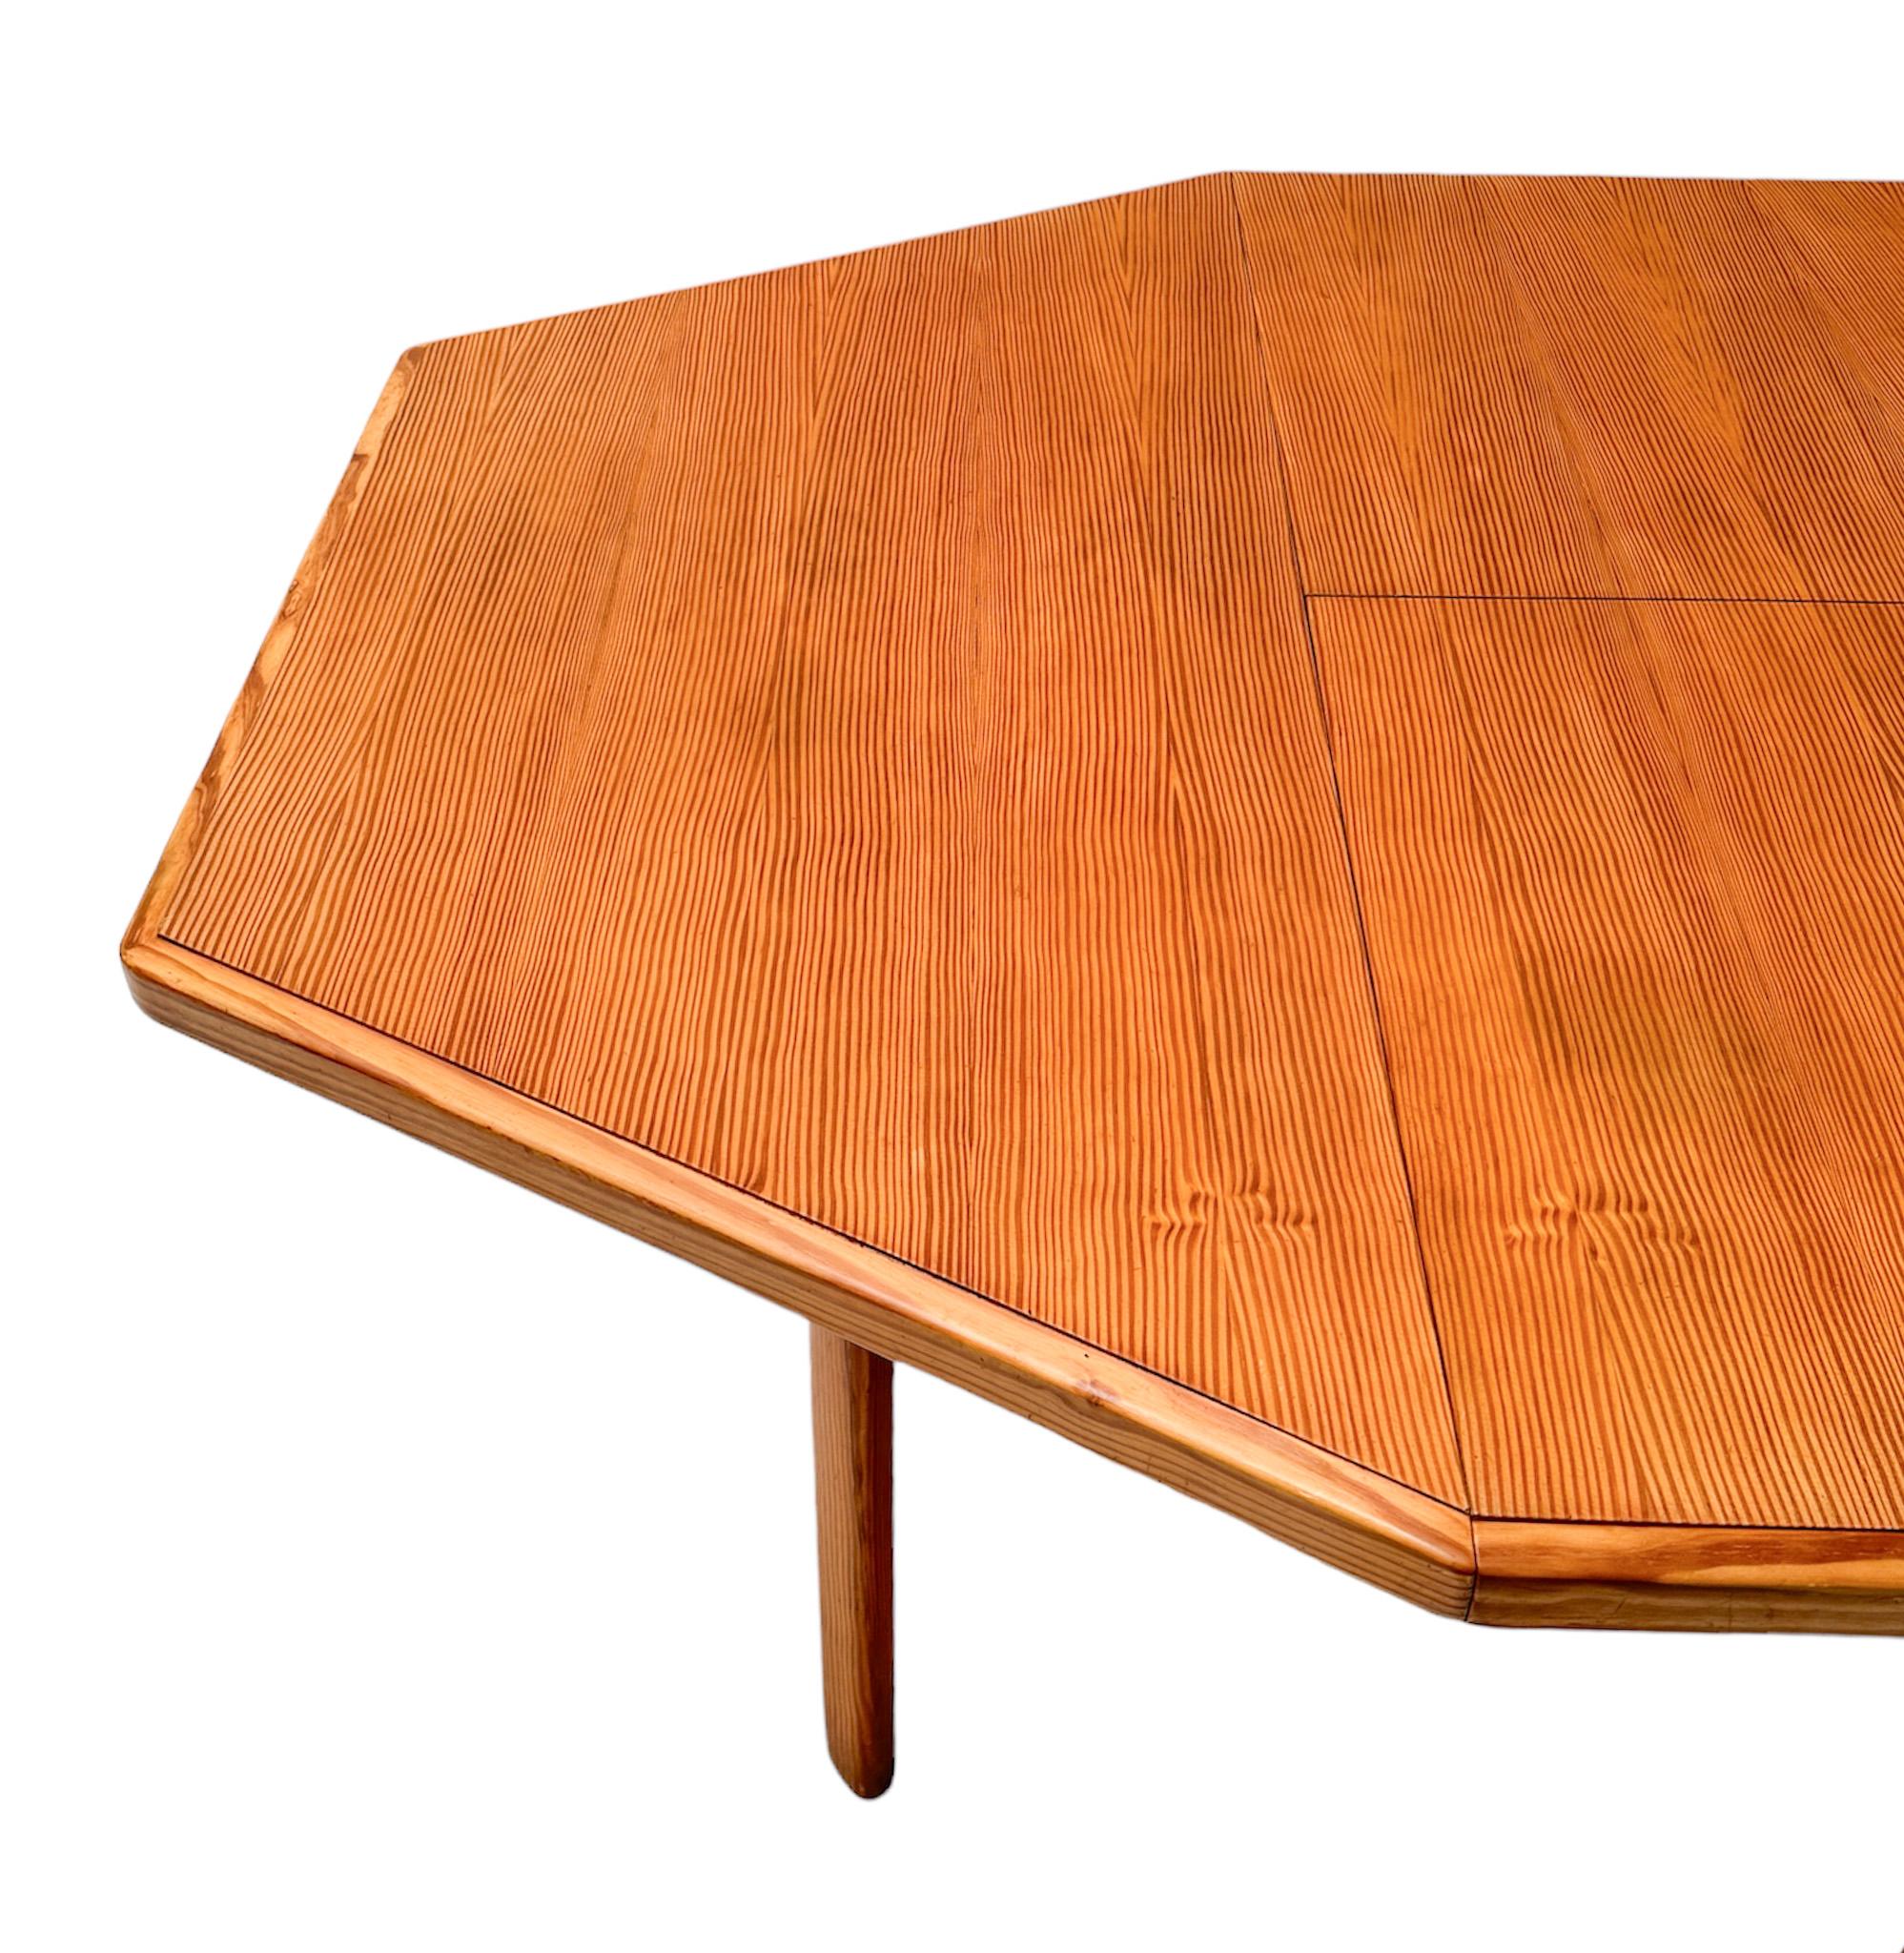 French Pine Mid-Century Modern Extendable Dining Room Table, 1970s For Sale 7